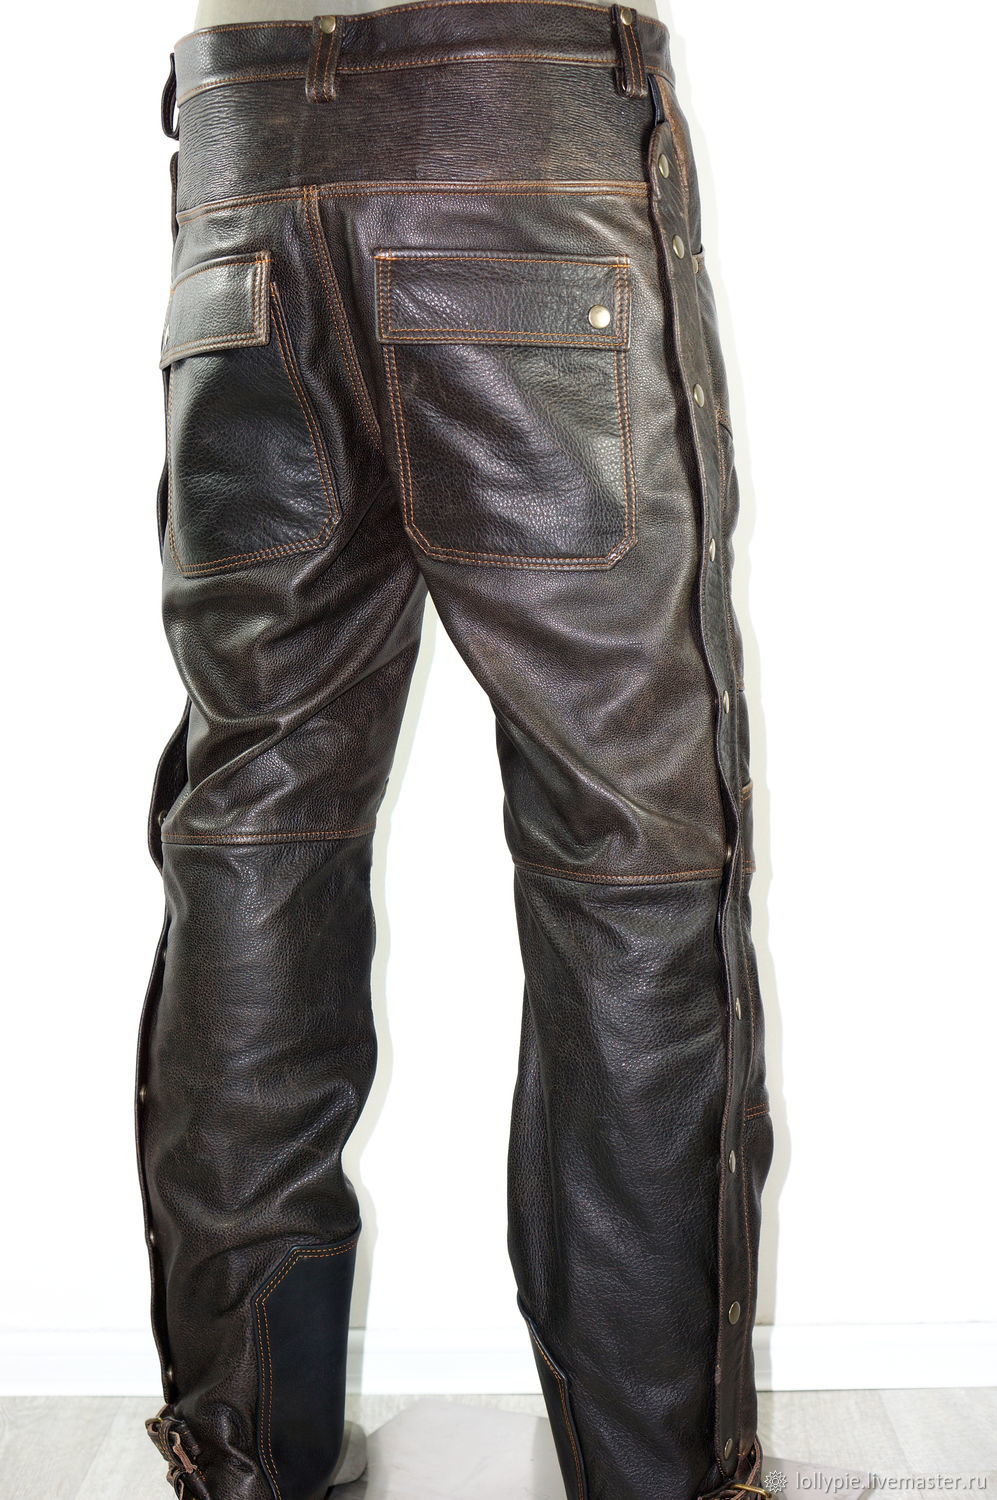 By City Mixed Adventure Limited Edition Touring Trousers in Brown – Veloce  Club